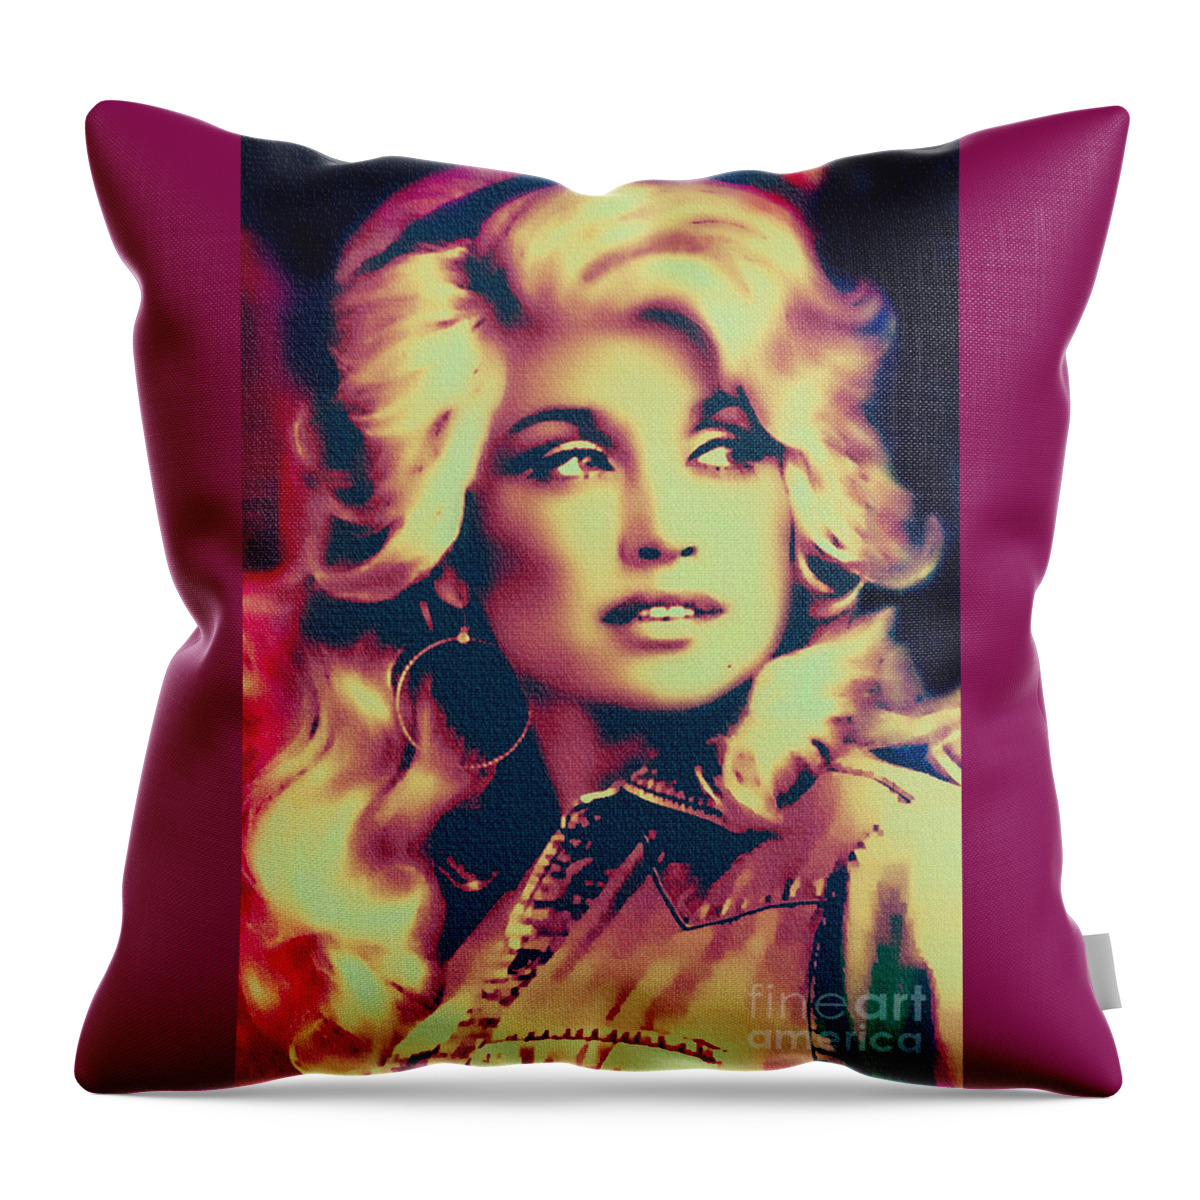 Dolly Parton Throw Pillow featuring the painting Dolly Parton - Vintage Painting by Ian Gledhill